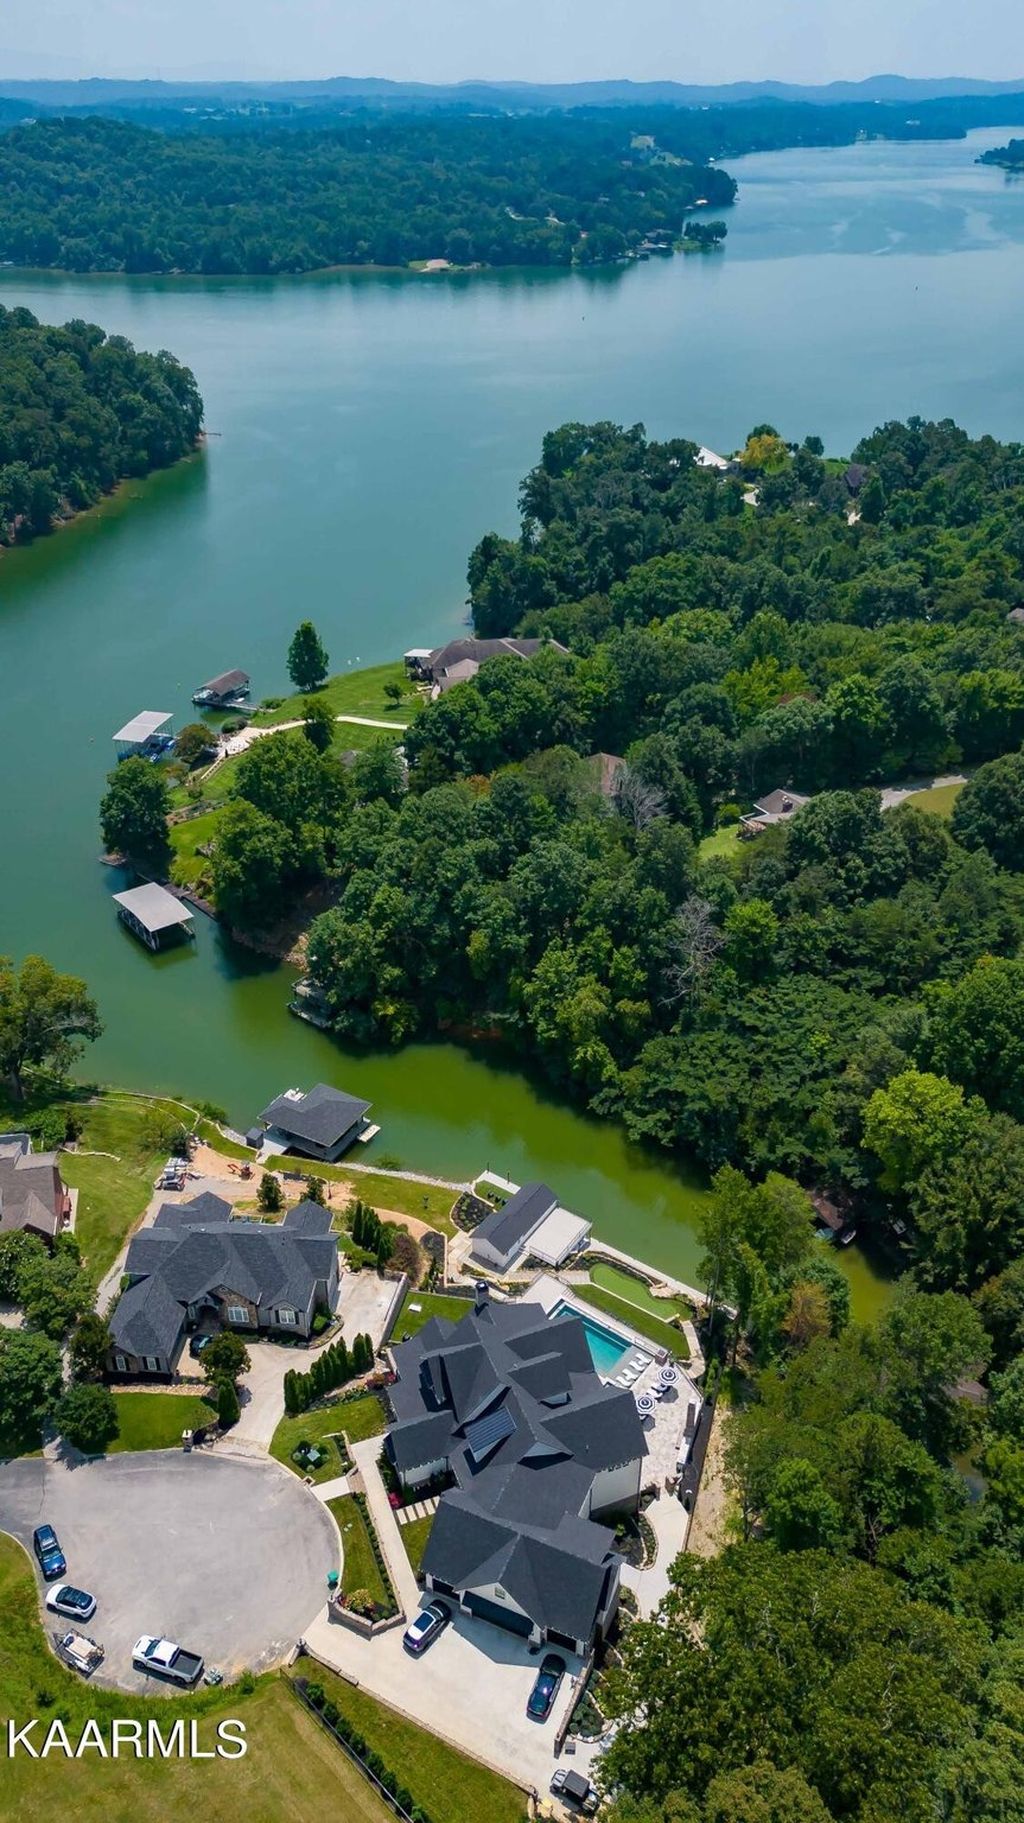 Awe inspiring residence with water views and privacy in knoxville tennessee listed at 5. 495 million 4